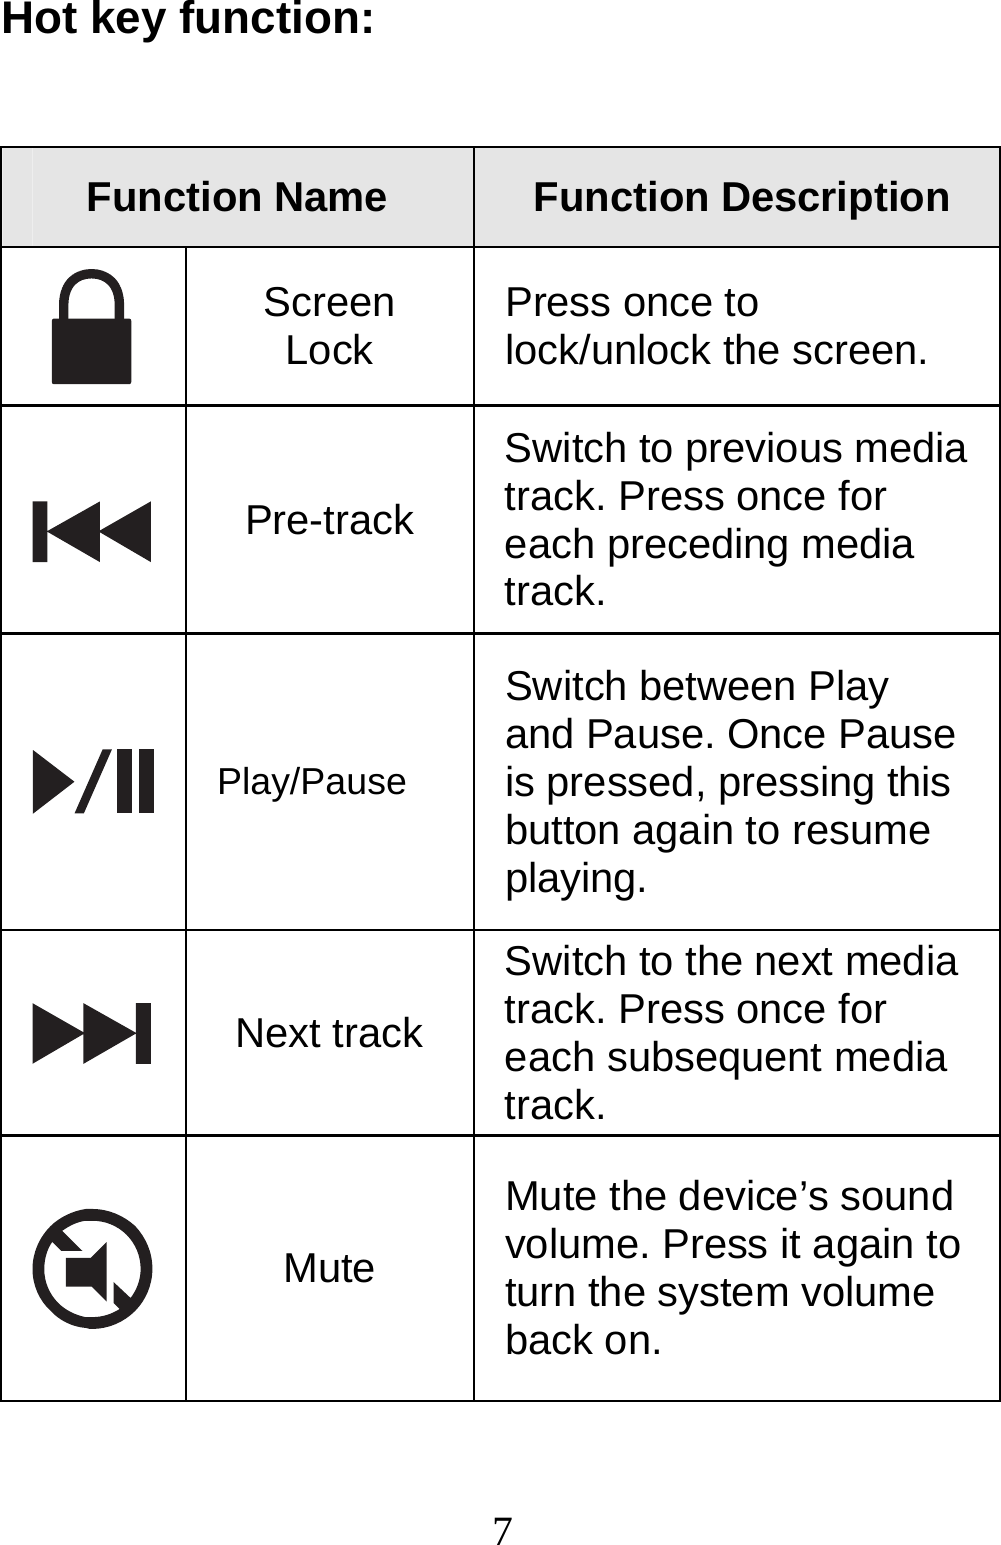  7Hot key function:   Function Name  Function Description  Screen Lock  Press once to lock/unlock the screen.  Pre-track Switch to previous media track. Press once for each preceding media track.  Play/Pause Switch between Play and Pause. Once Pause is pressed, pressing this button again to resume playing.  Next track Switch to the next media track. Press once for each subsequent media track.  Mute Mute the device’s sound volume. Press it again to turn the system volume back on. 